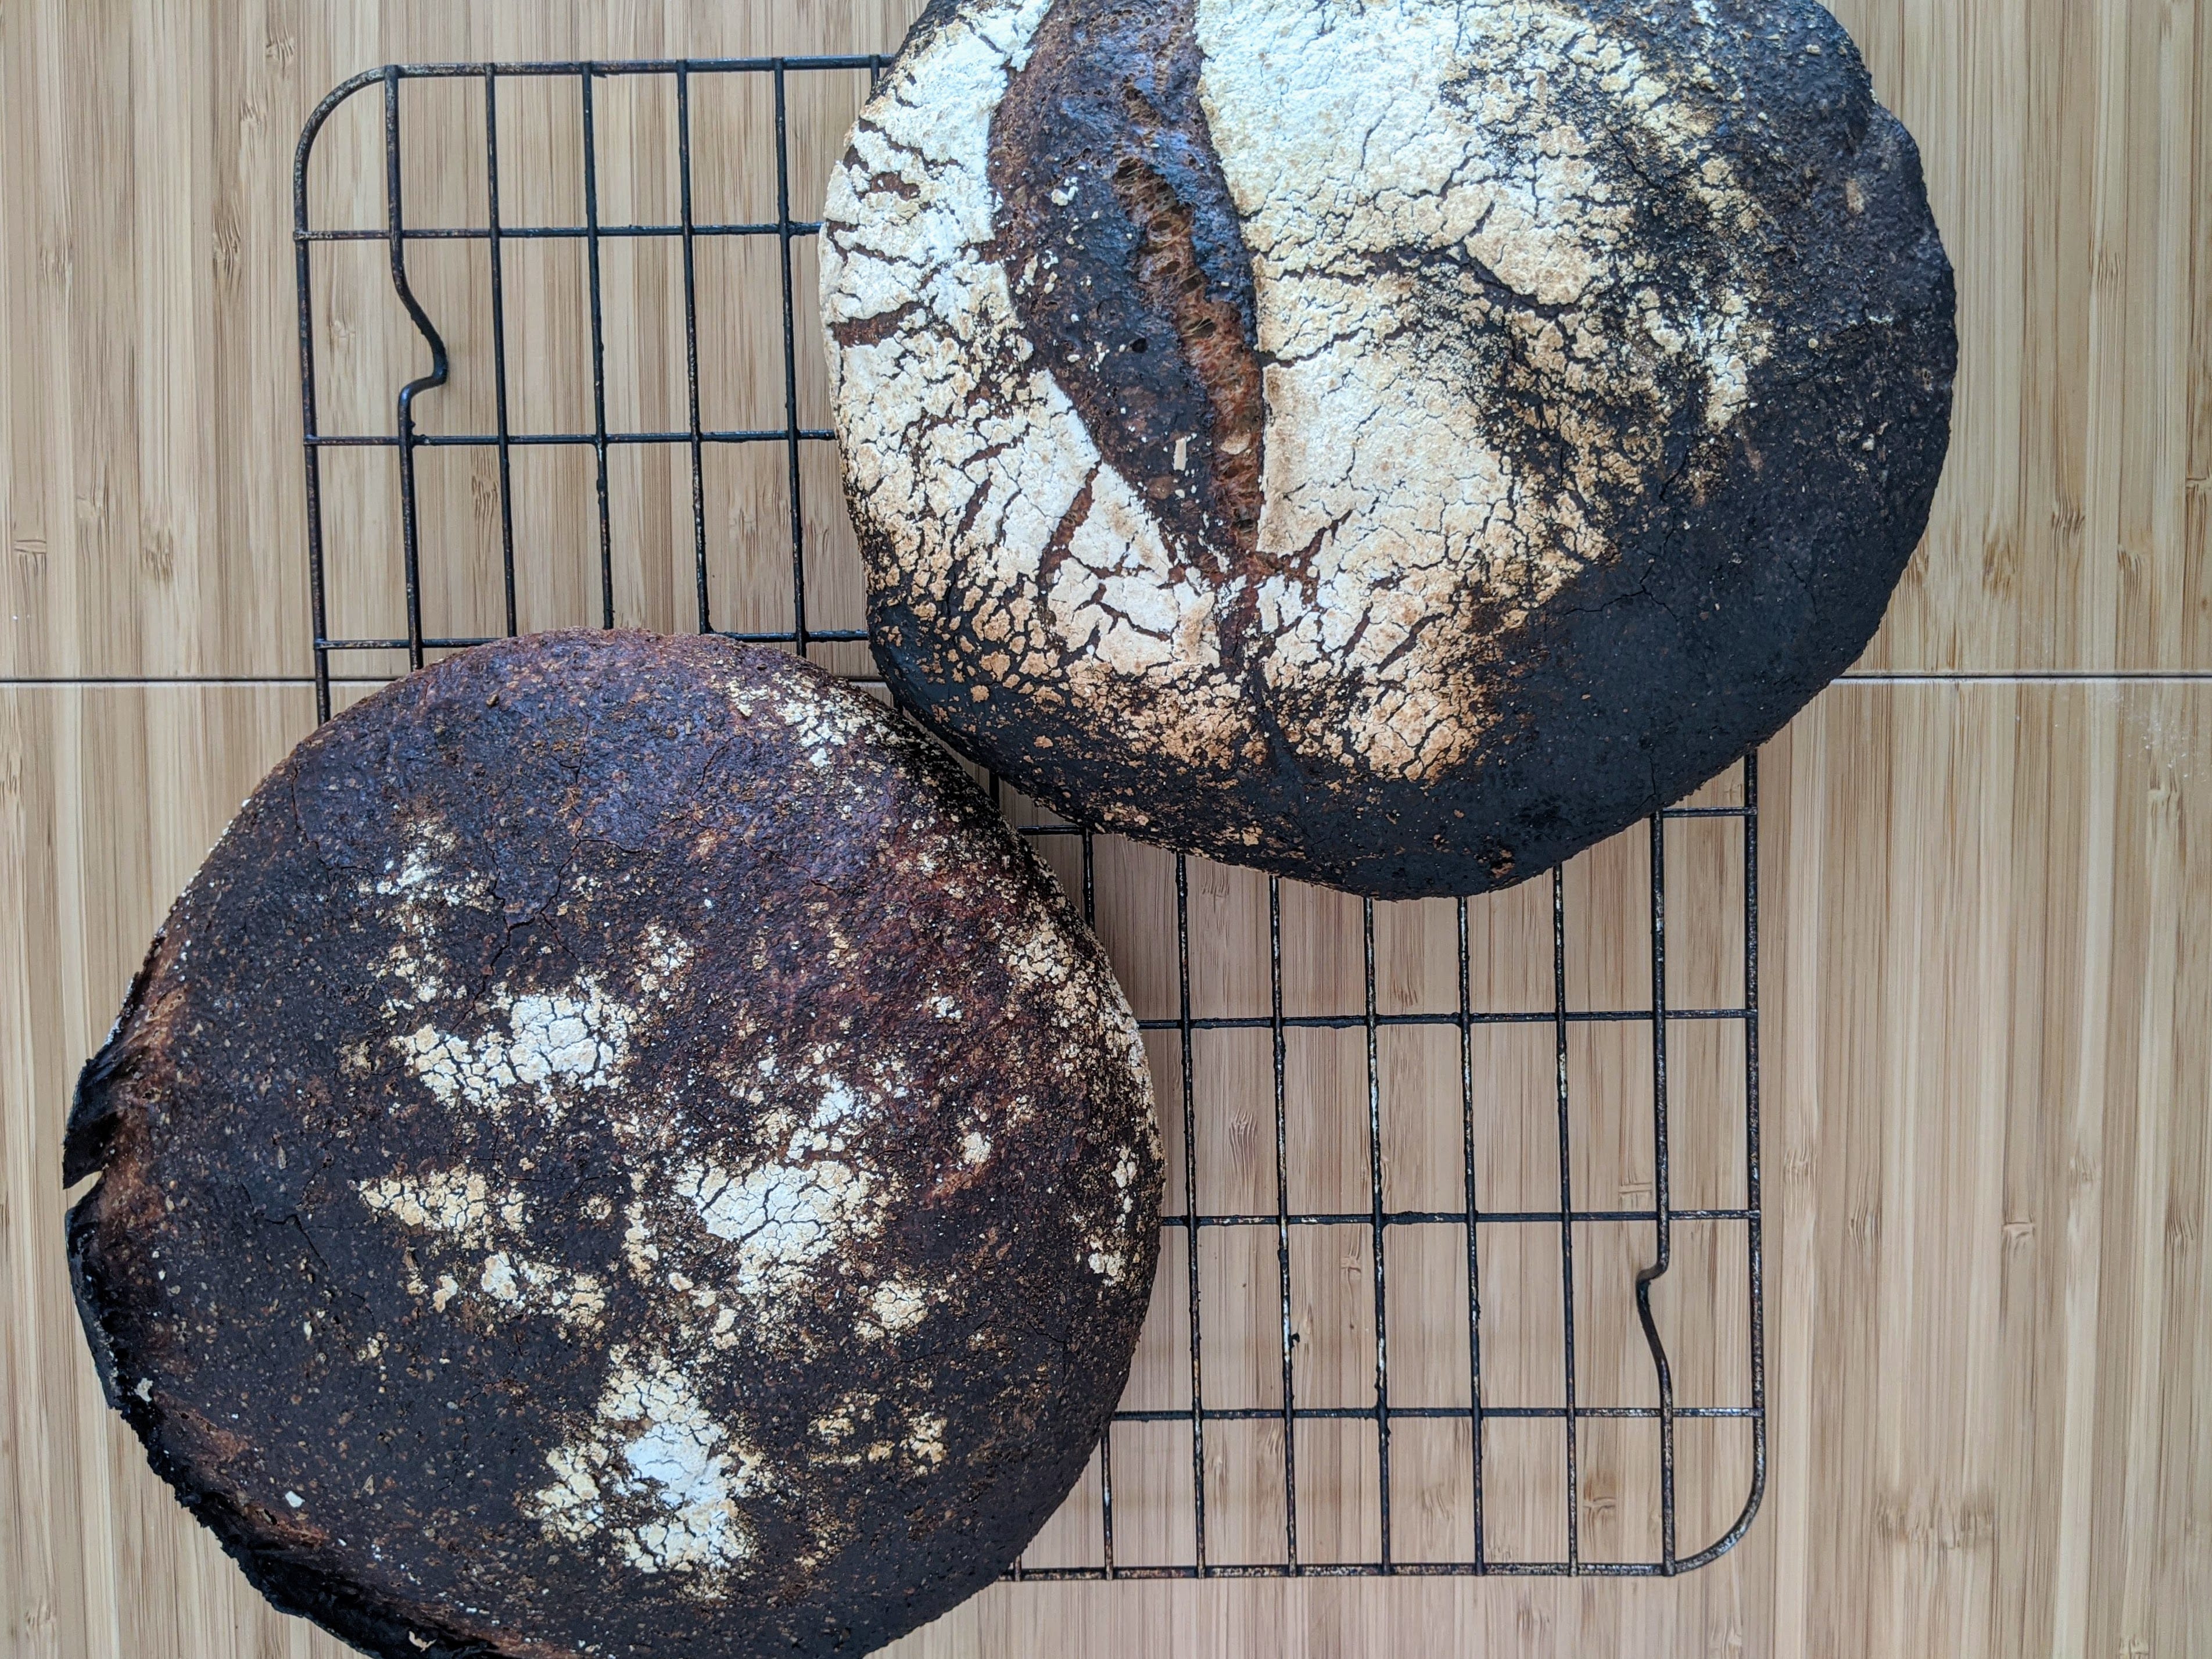 Two darkly baked (almost burnt) loaves